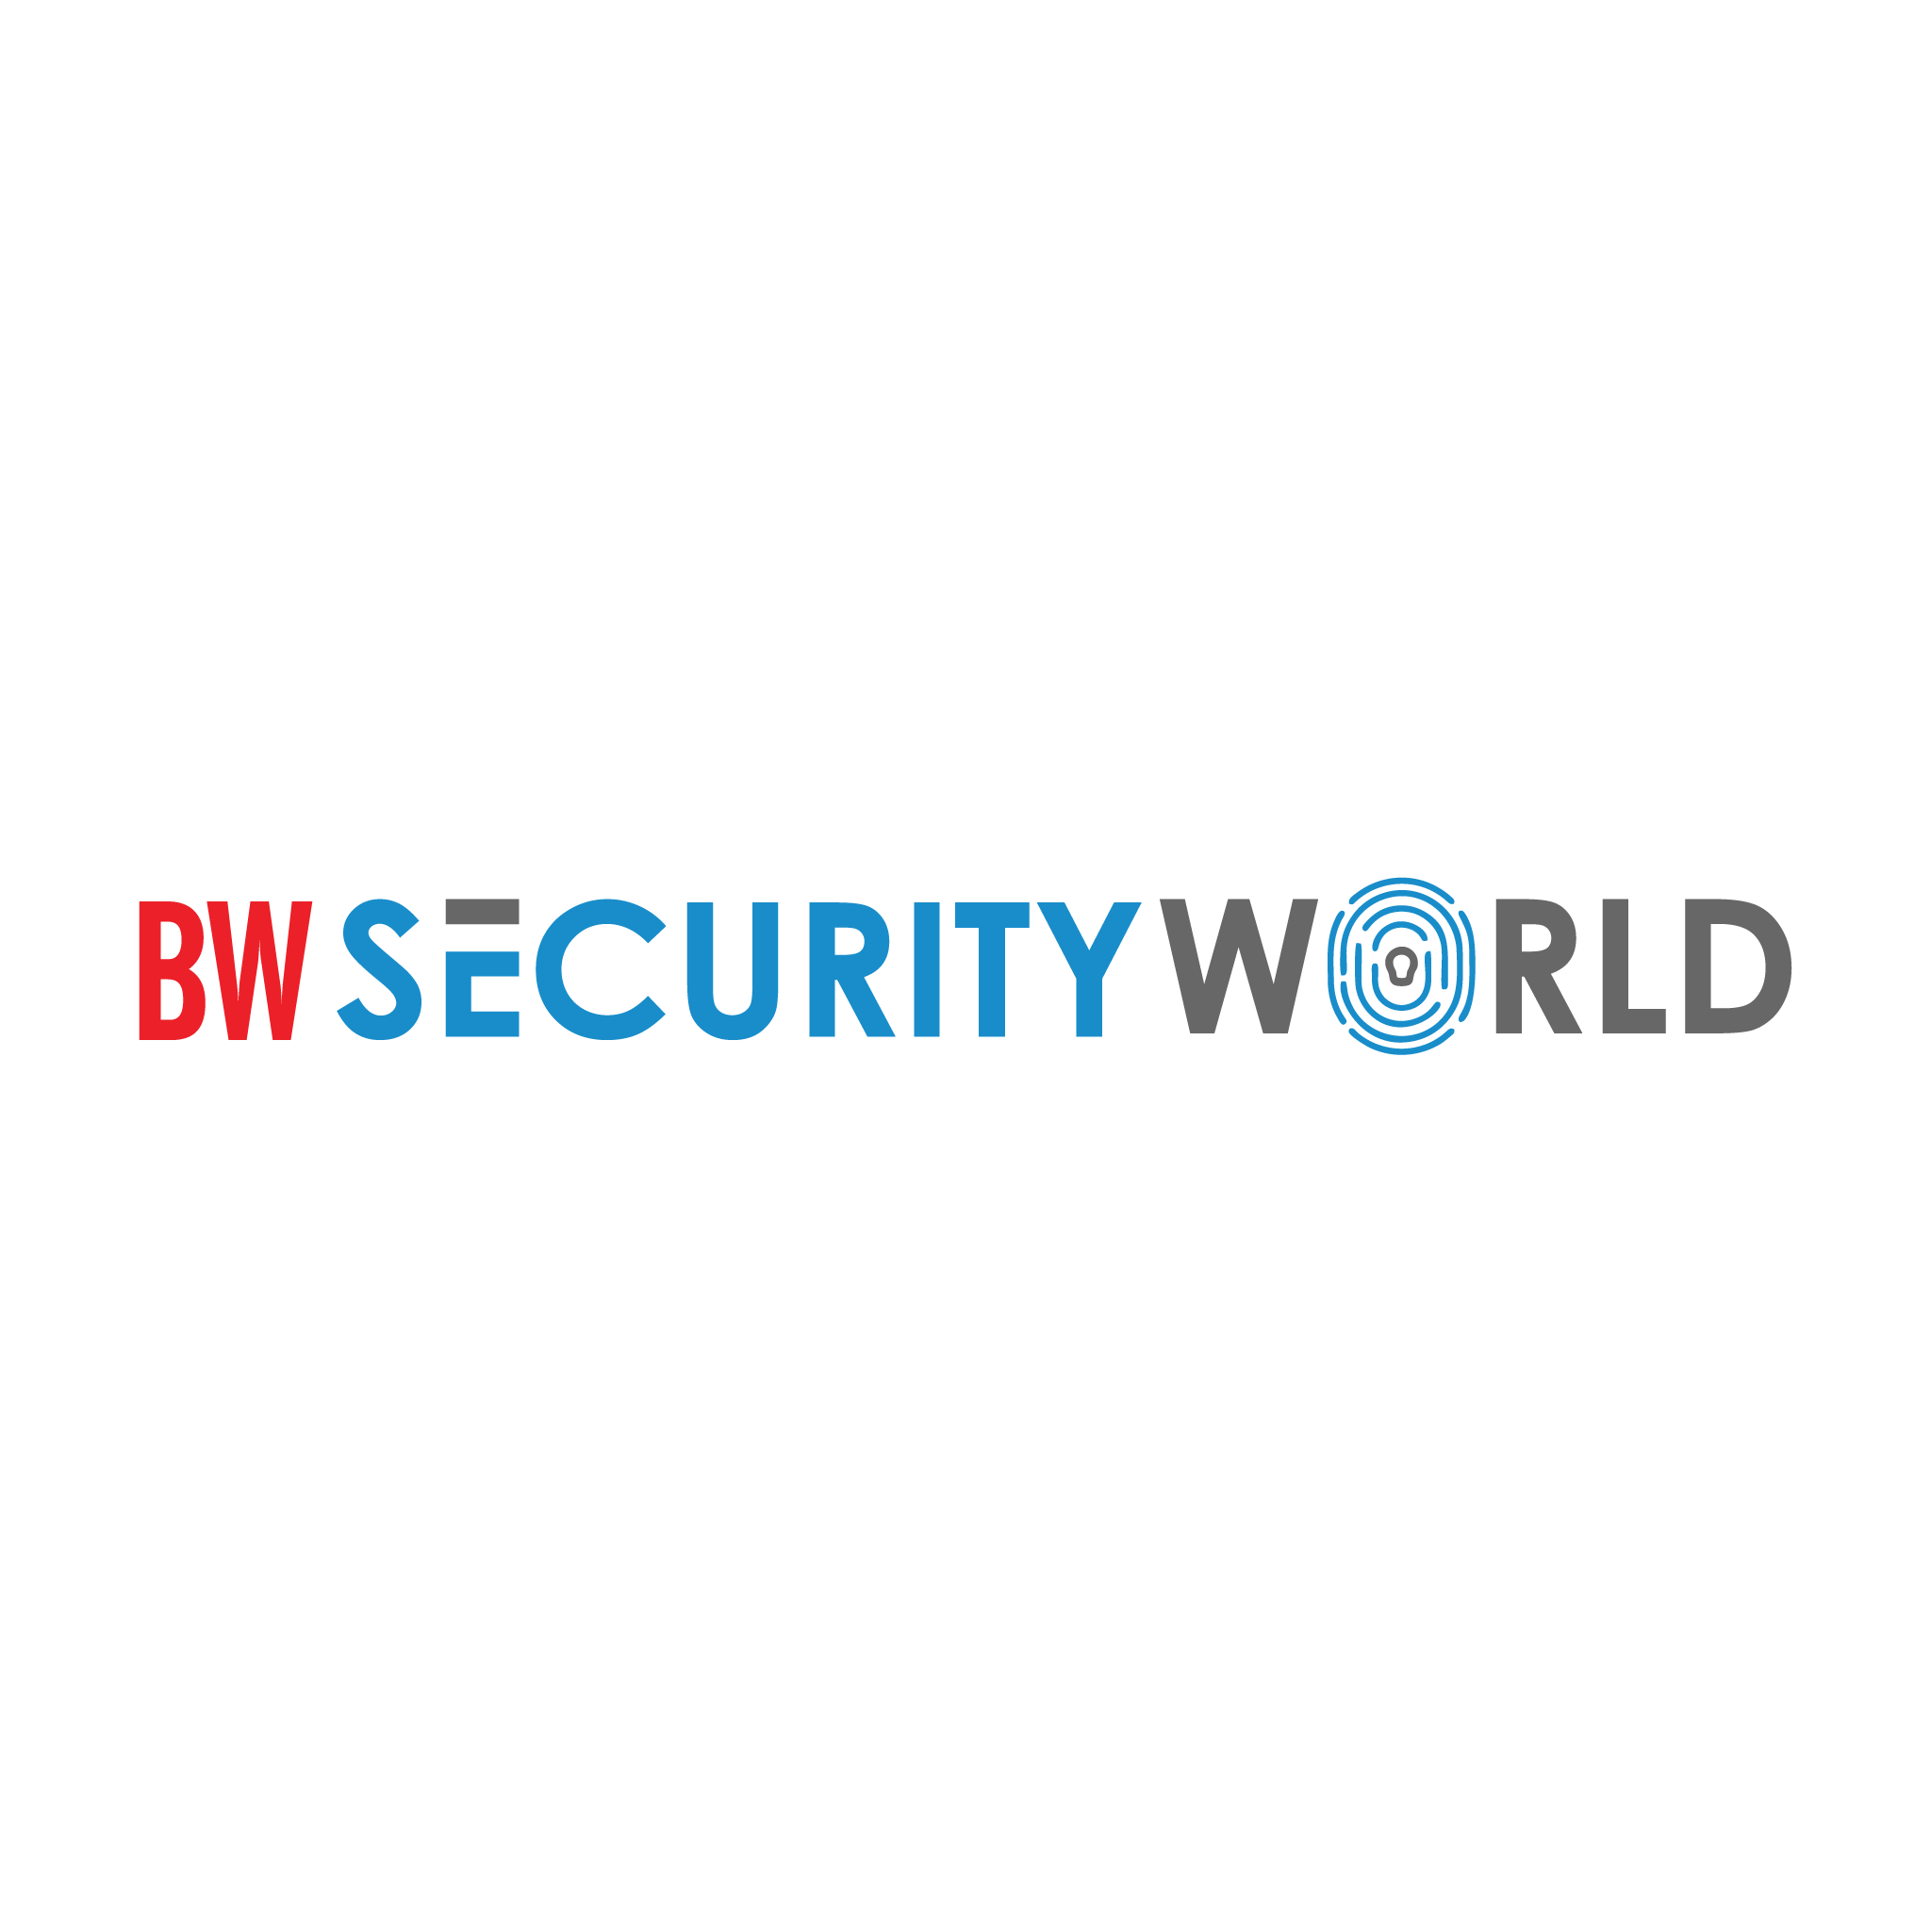 BW Security